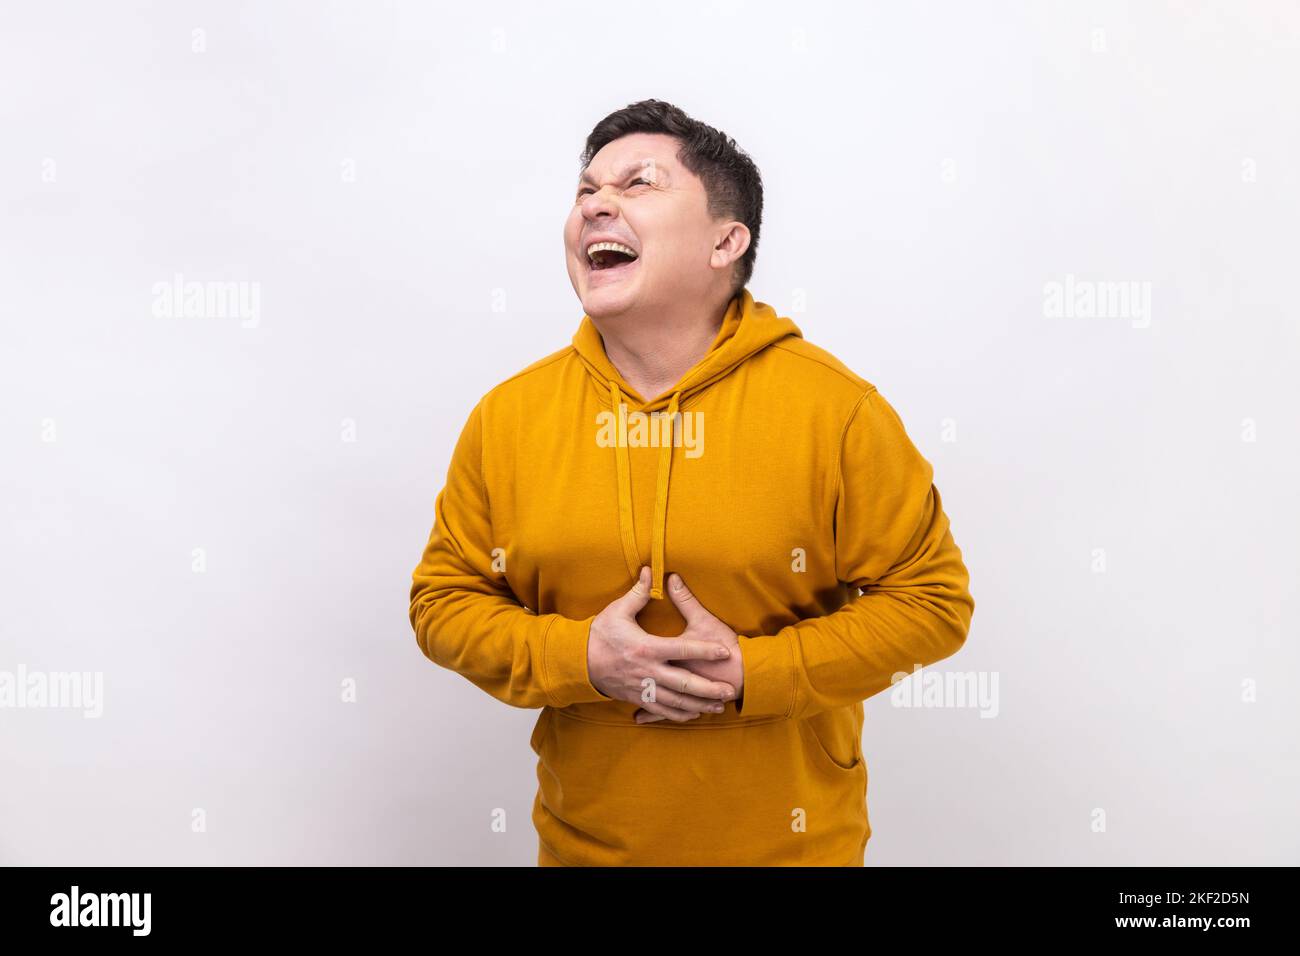 Portrait of extremely excited happy man holding his belly and laughing out loud, chuckling giggling at amusing joke, wearing urban style hoodie. Indoor studio shot isolated on white background. Stock Photo